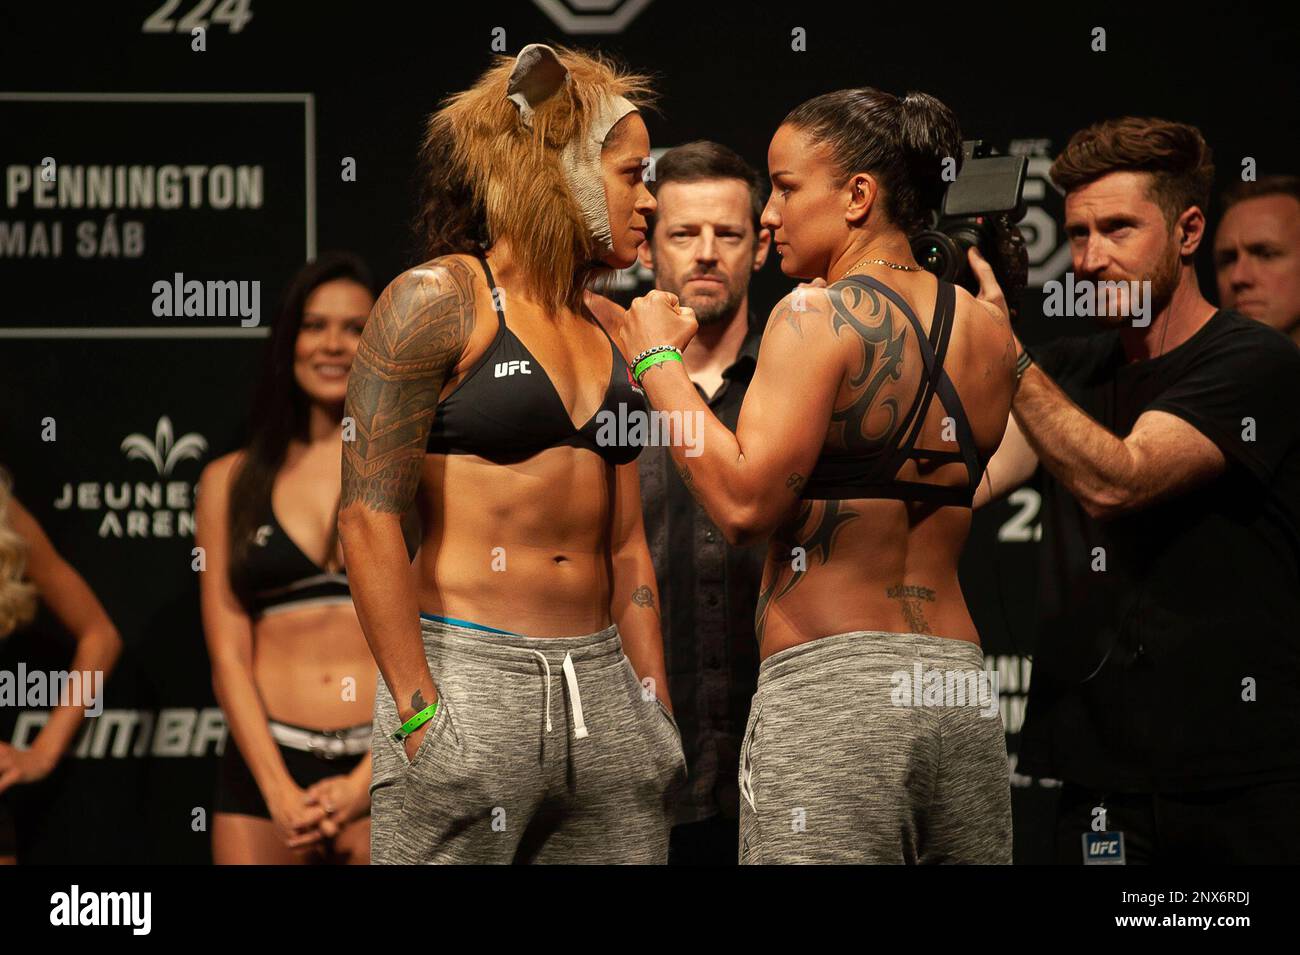 RJ - Rio de Janeiro - 05/11/2018 - Weigh-in UFC 224 - Fighters Amanda Nunes  and Raquel Pennington face each other during the official weigh-in for UFC  224 this afternoon at Jeneusse